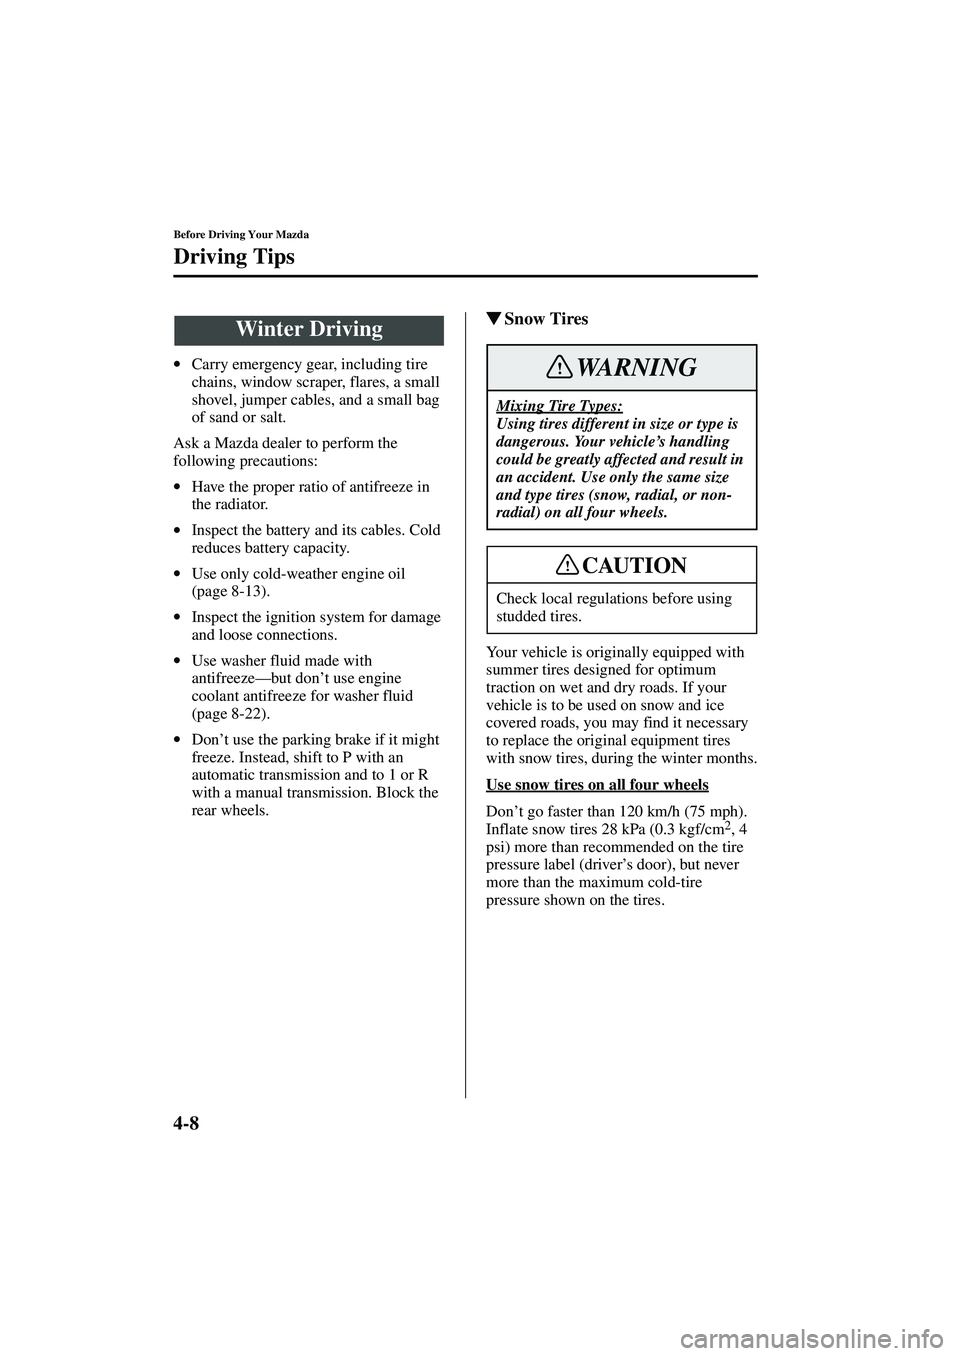 MAZDA MODEL MX-5 MIATA 2002  Owners Manual 4-8
Before Driving Your Mazda
Driving Tips
Form No. 8Q42-EA-01F
•Carry emergency gear, including tire 
chains, window scraper, flares, a small 
shovel, jumper cables, and a small bag 
of sand or sal